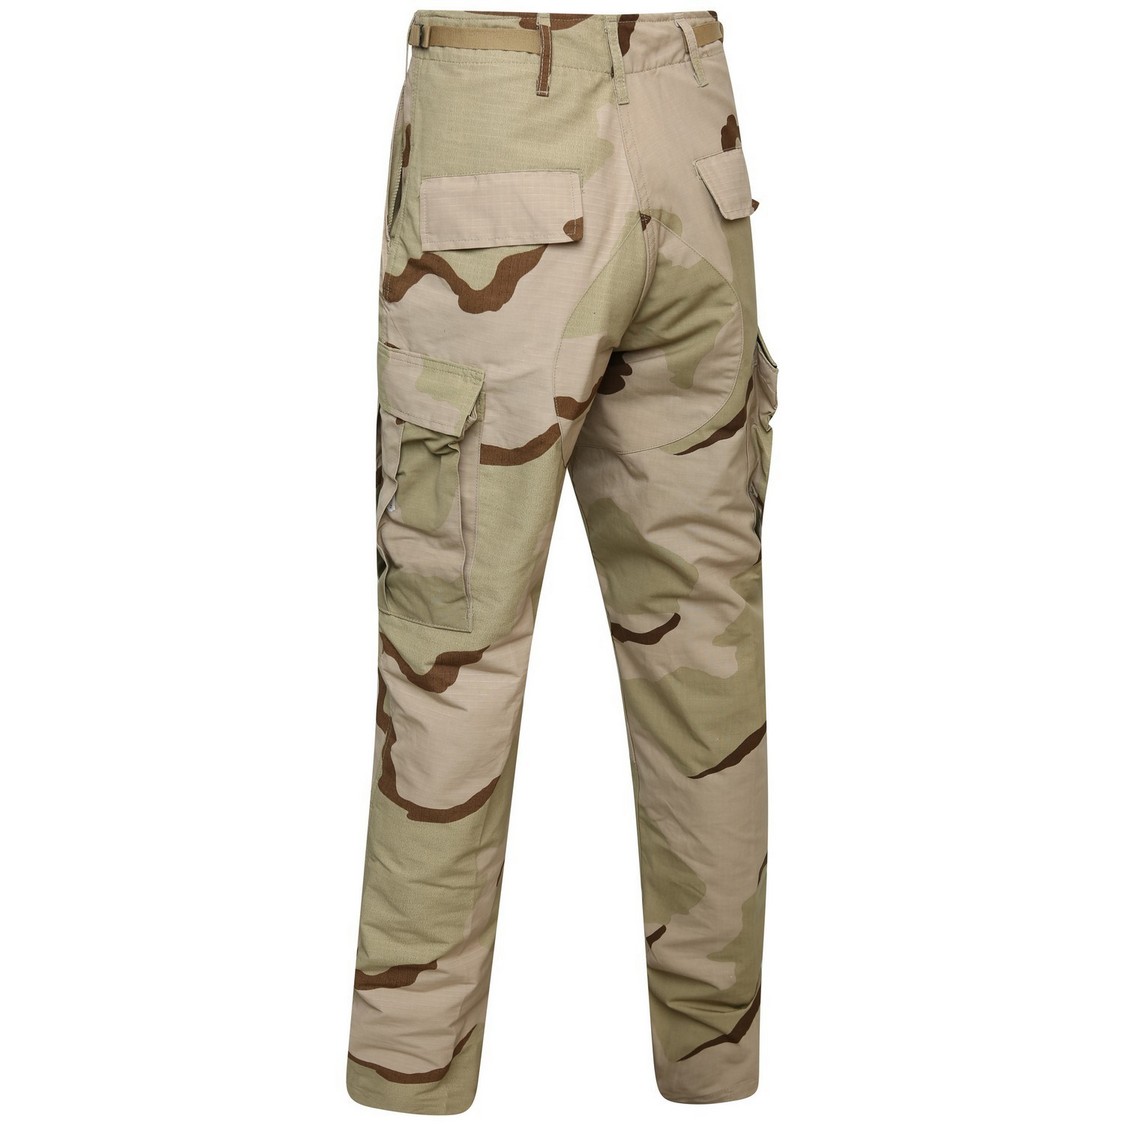 Tru-Spec BDU Ripstop Combat Trousers US Army Military Tactical Security ...